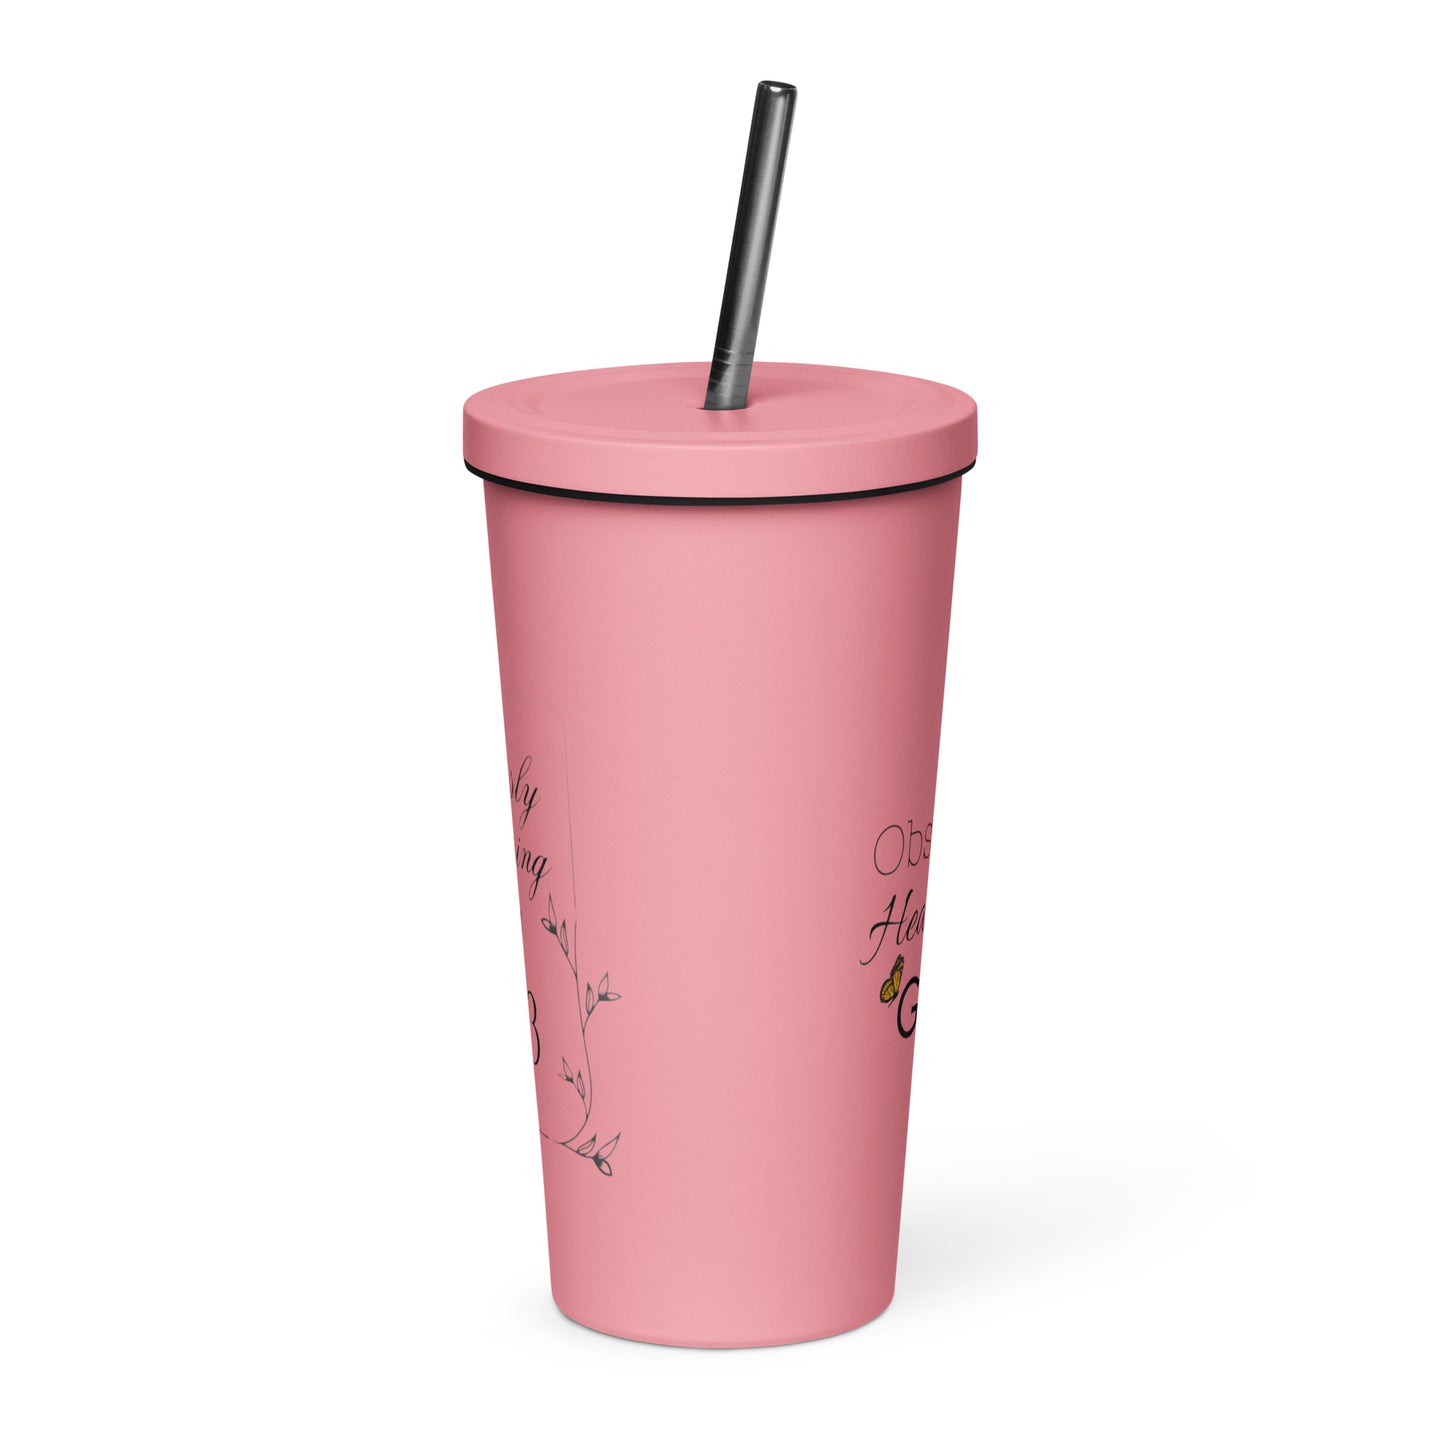 Obstinate, Headstrong Girl Insulated Tumbler with straw